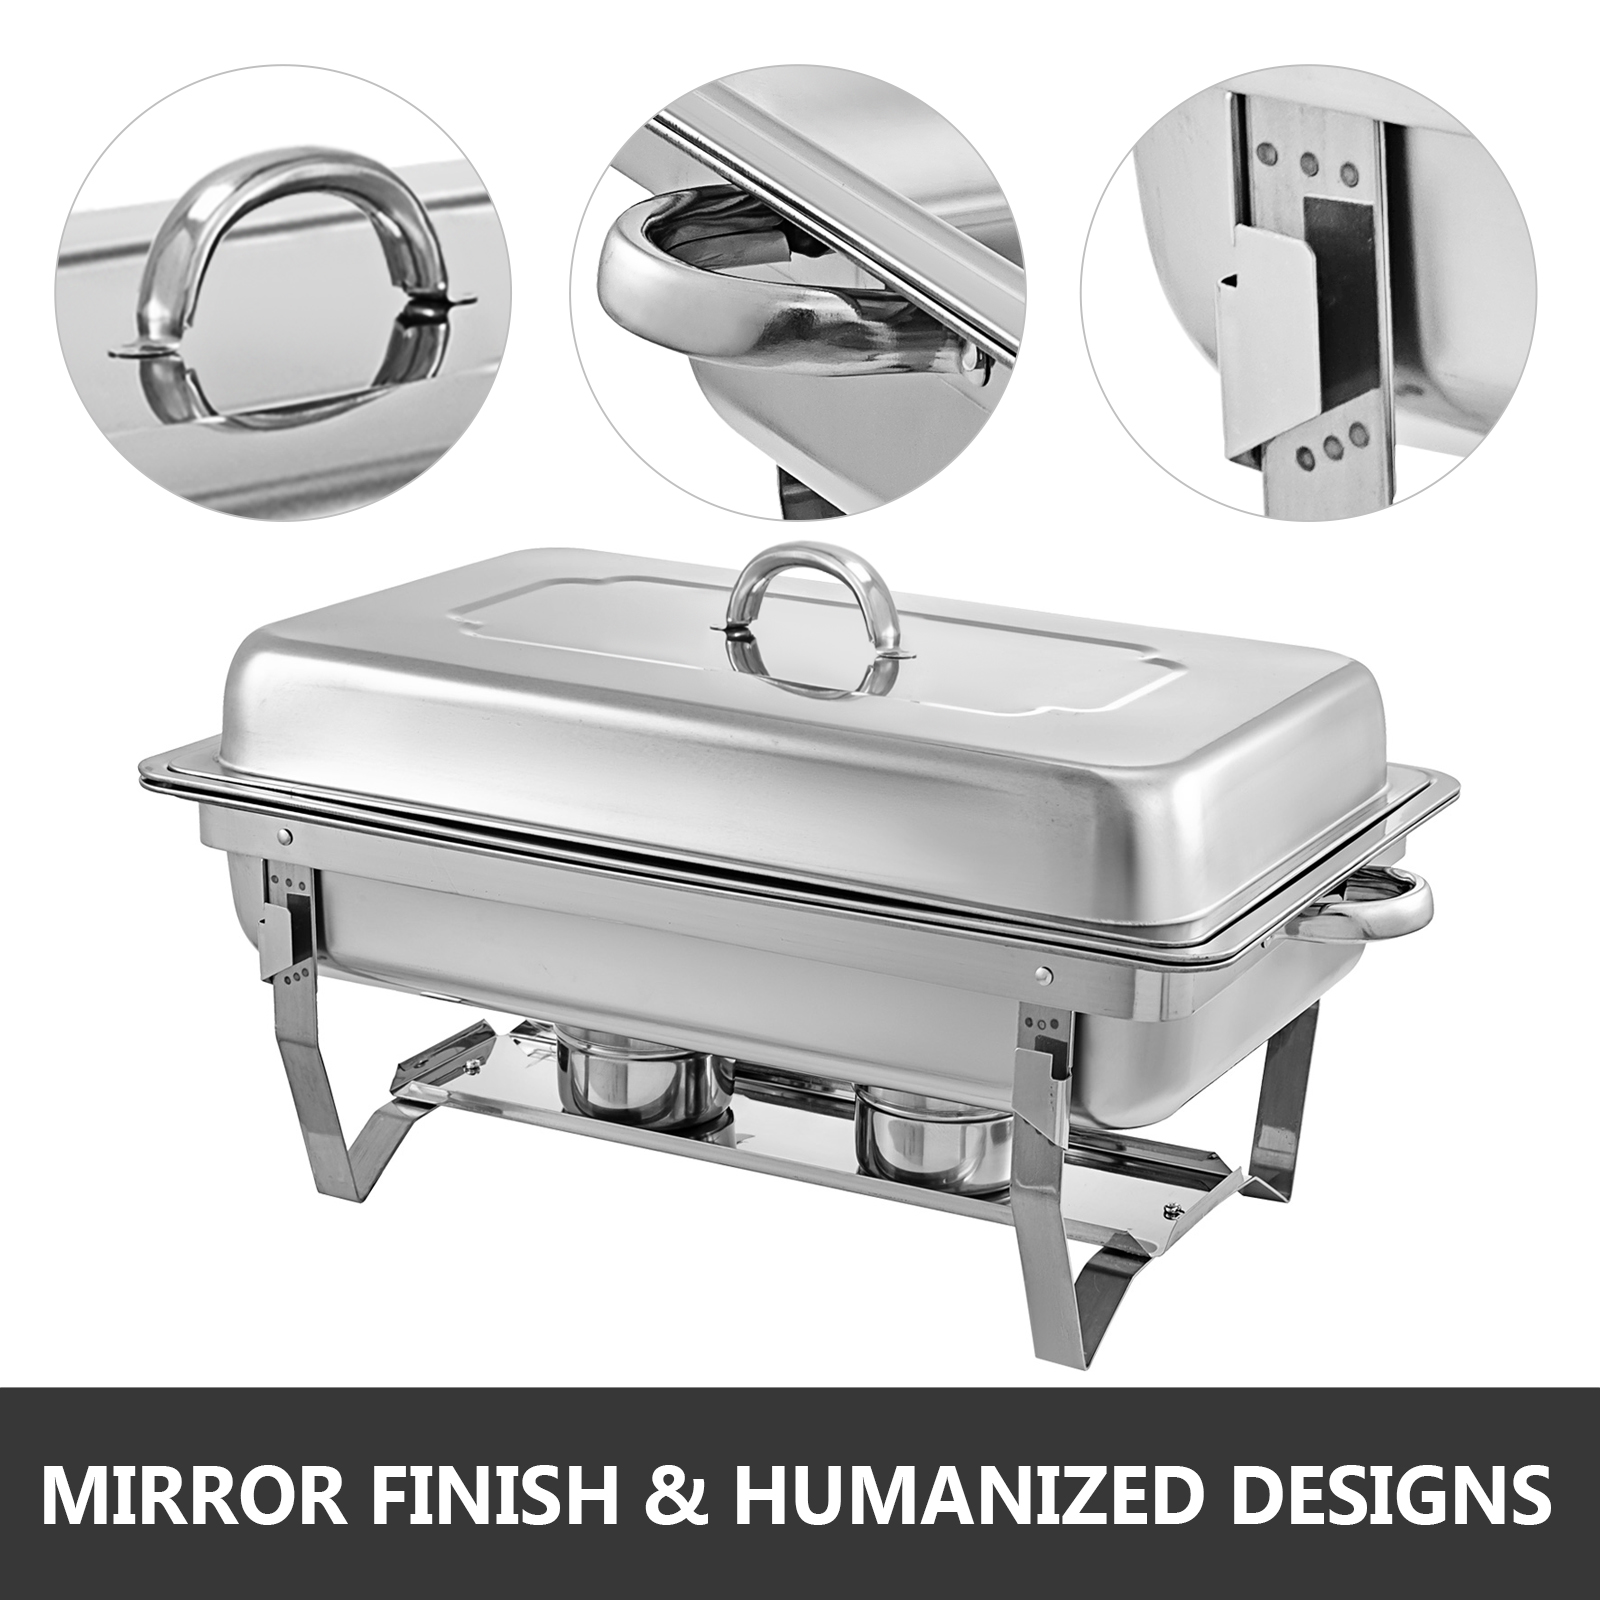 NEW CATERING 4 PACK FOLDING CHAFER CHAFING Dish Sets 8 QT PACK WITH $20 REBATE 